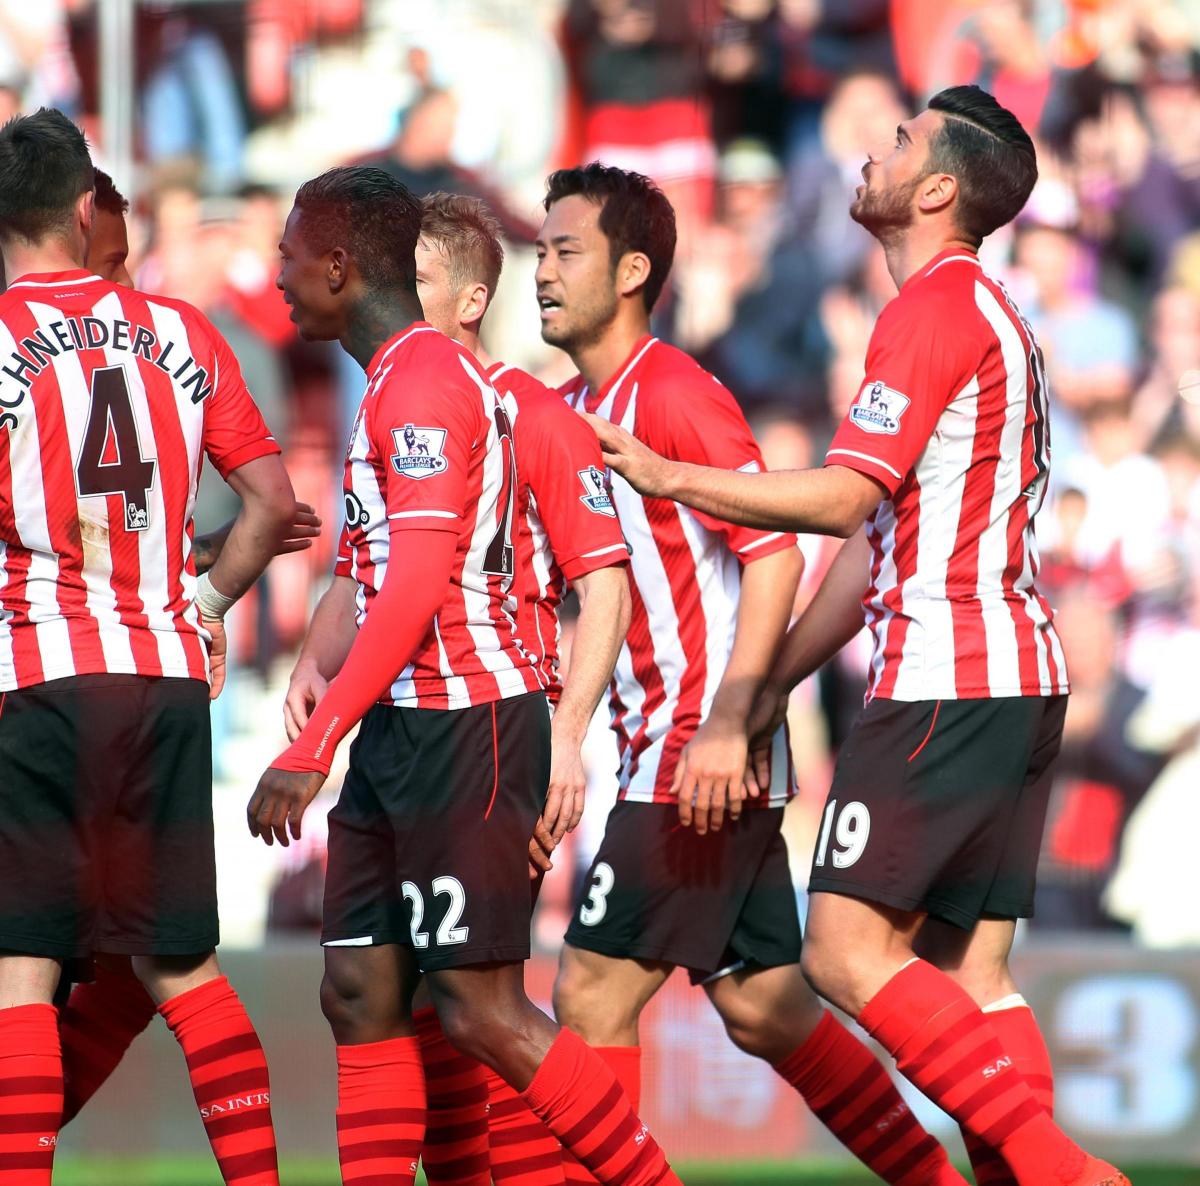 Picture from the Barclays Premier League match between Saints and Hull at St Mary's Stadium. The unauthorised downloading, editing, copying or distribution of this image is strictly prohibited.